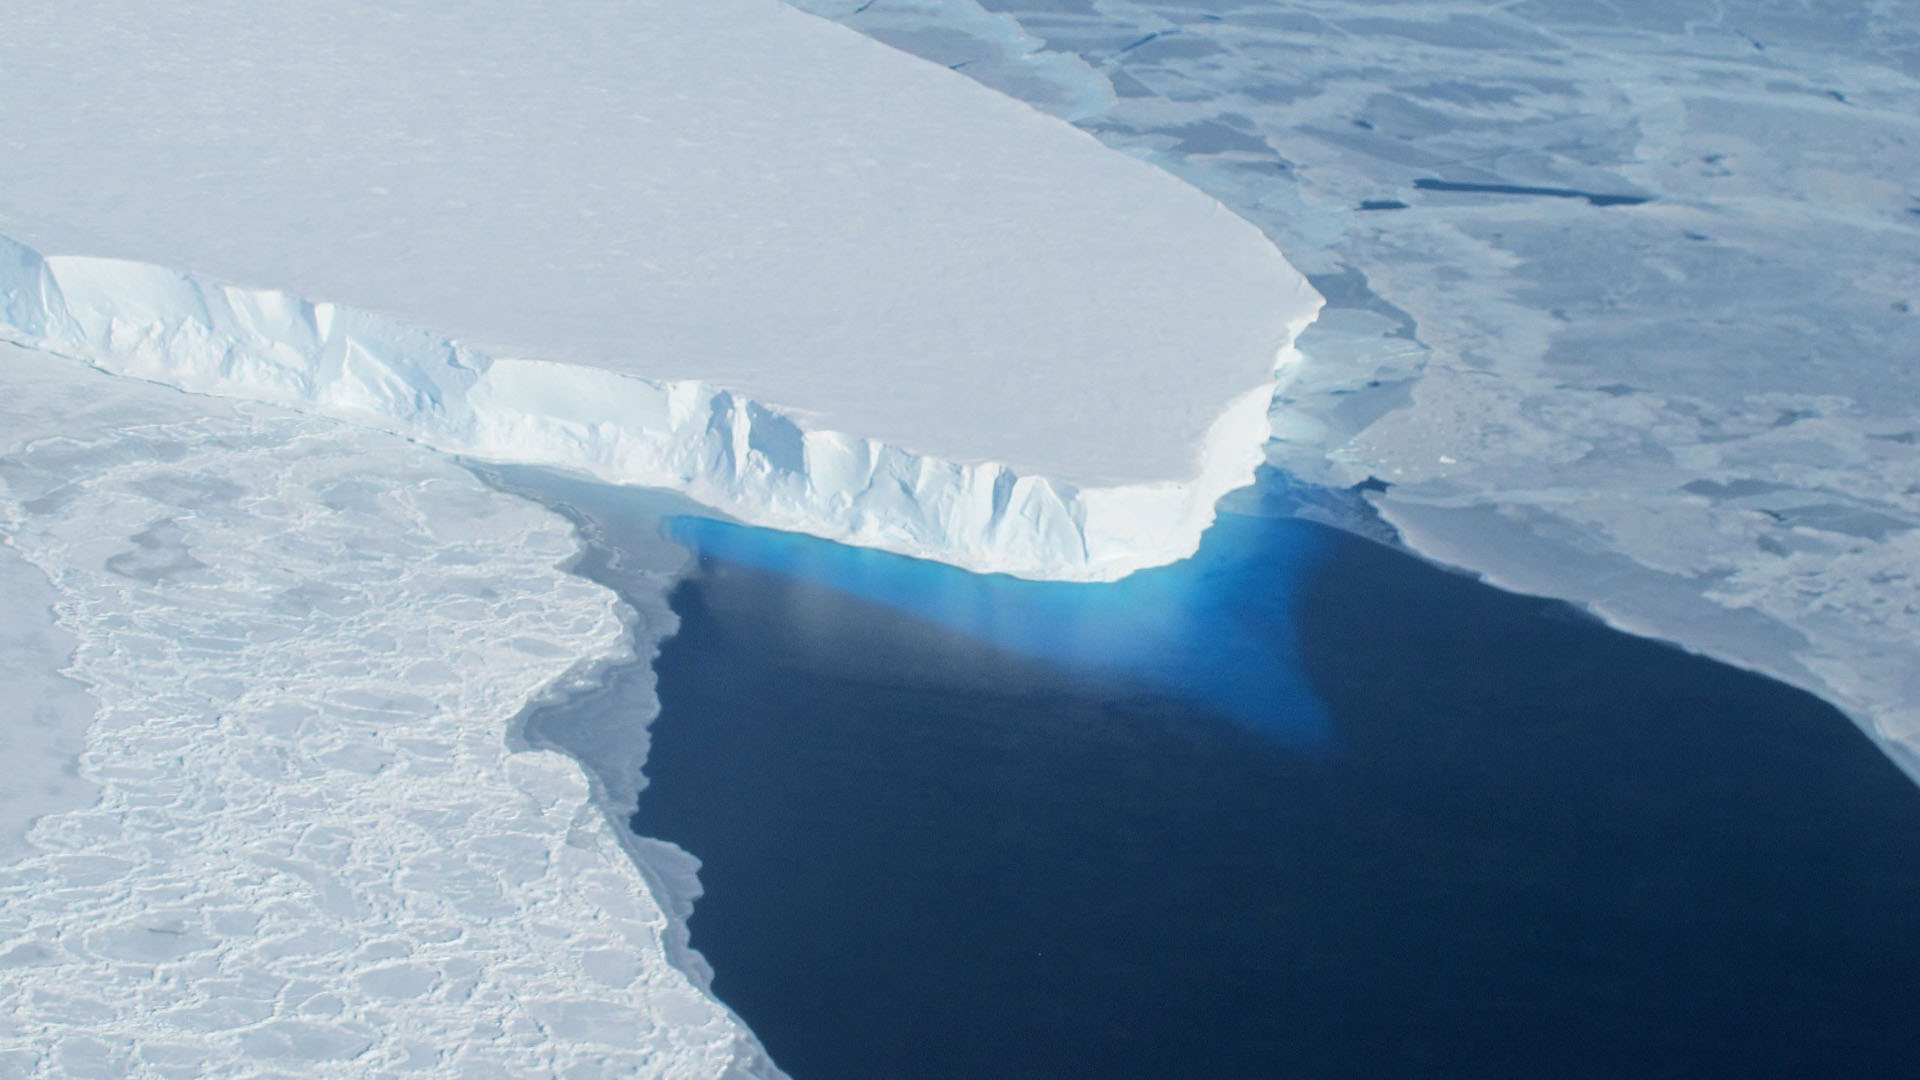 Water Jet Forced Porn - Doomsday Glacier melting in Antarctica is bad for sea level rise | Space